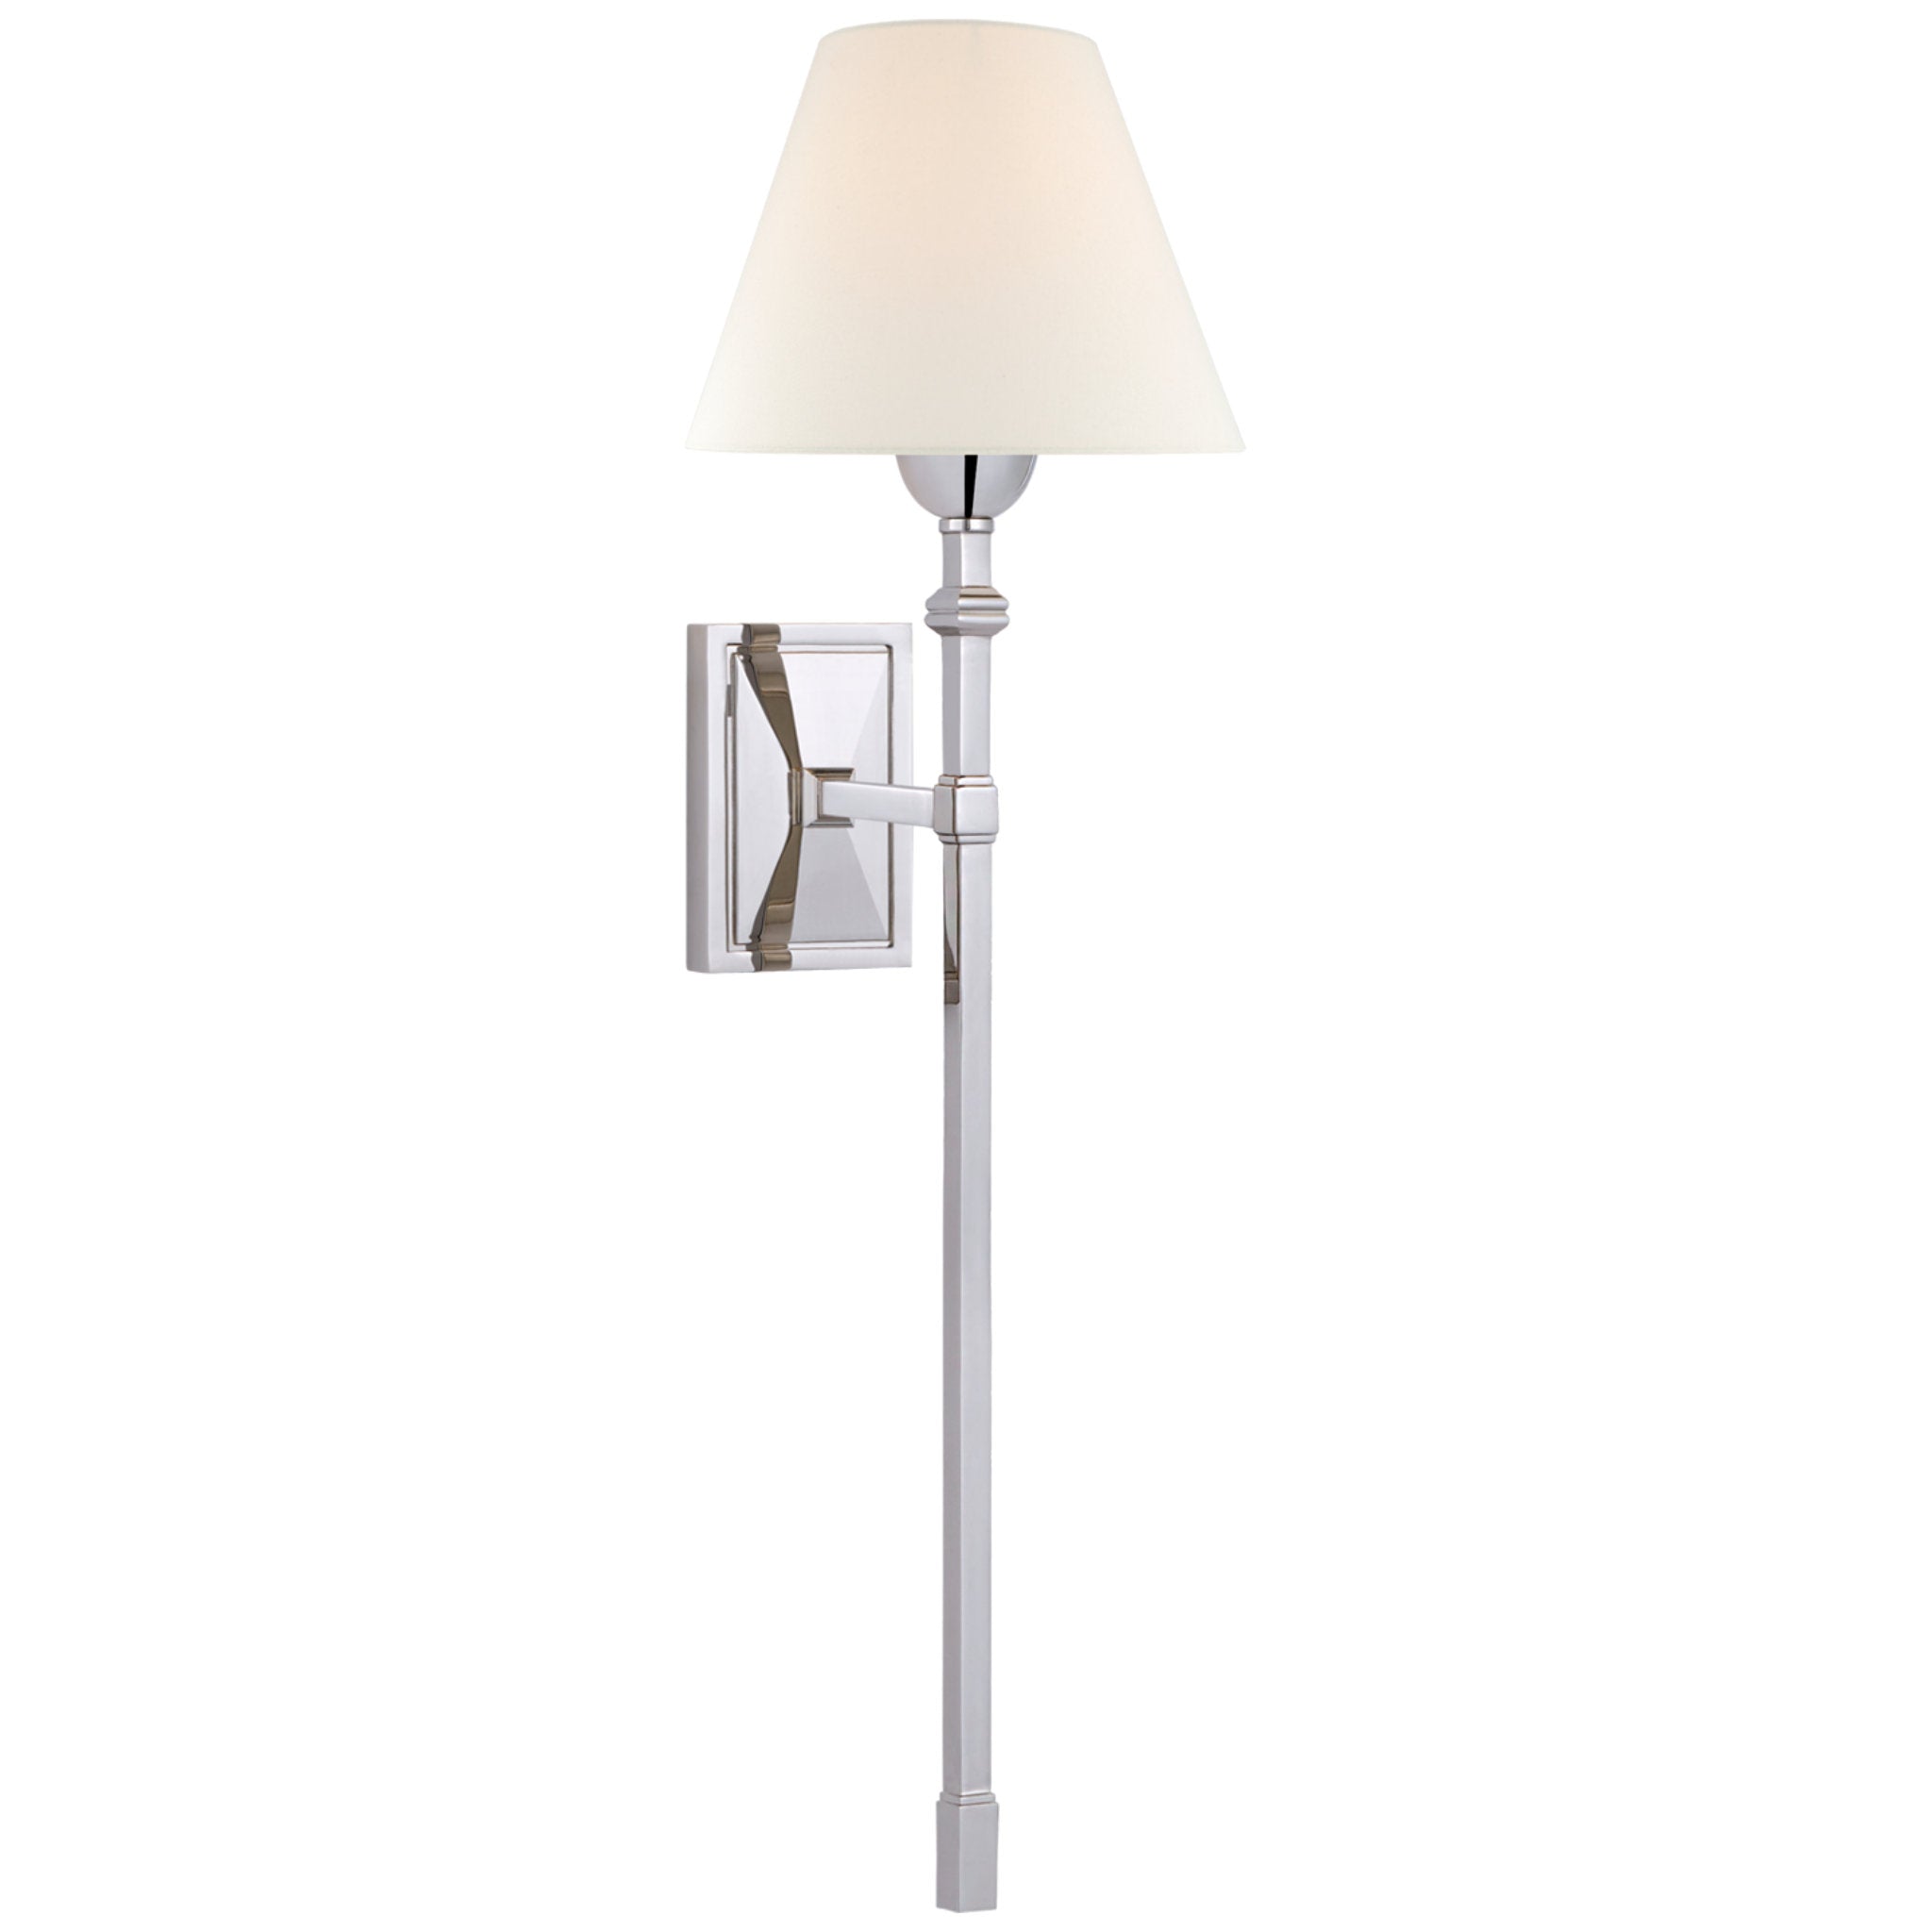 Alexa Hampton Jane Large Single Tail Sconce in Polished Nickel with Linen Shade